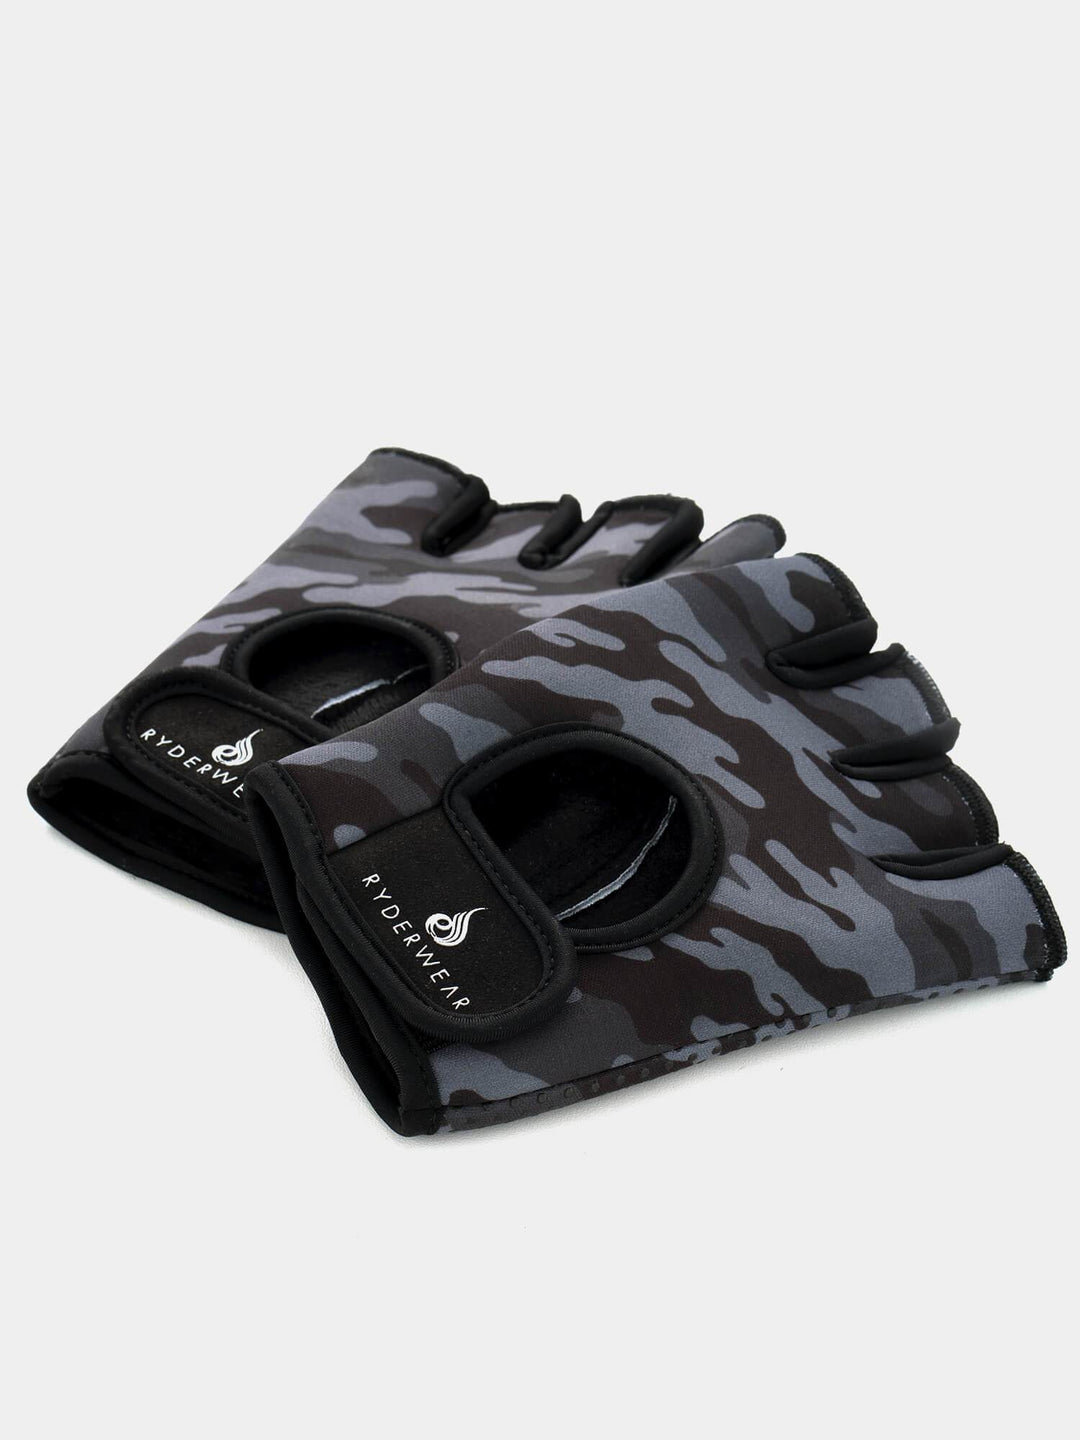 Lifting Gloves - Black Camo Accessories Ryderwear 